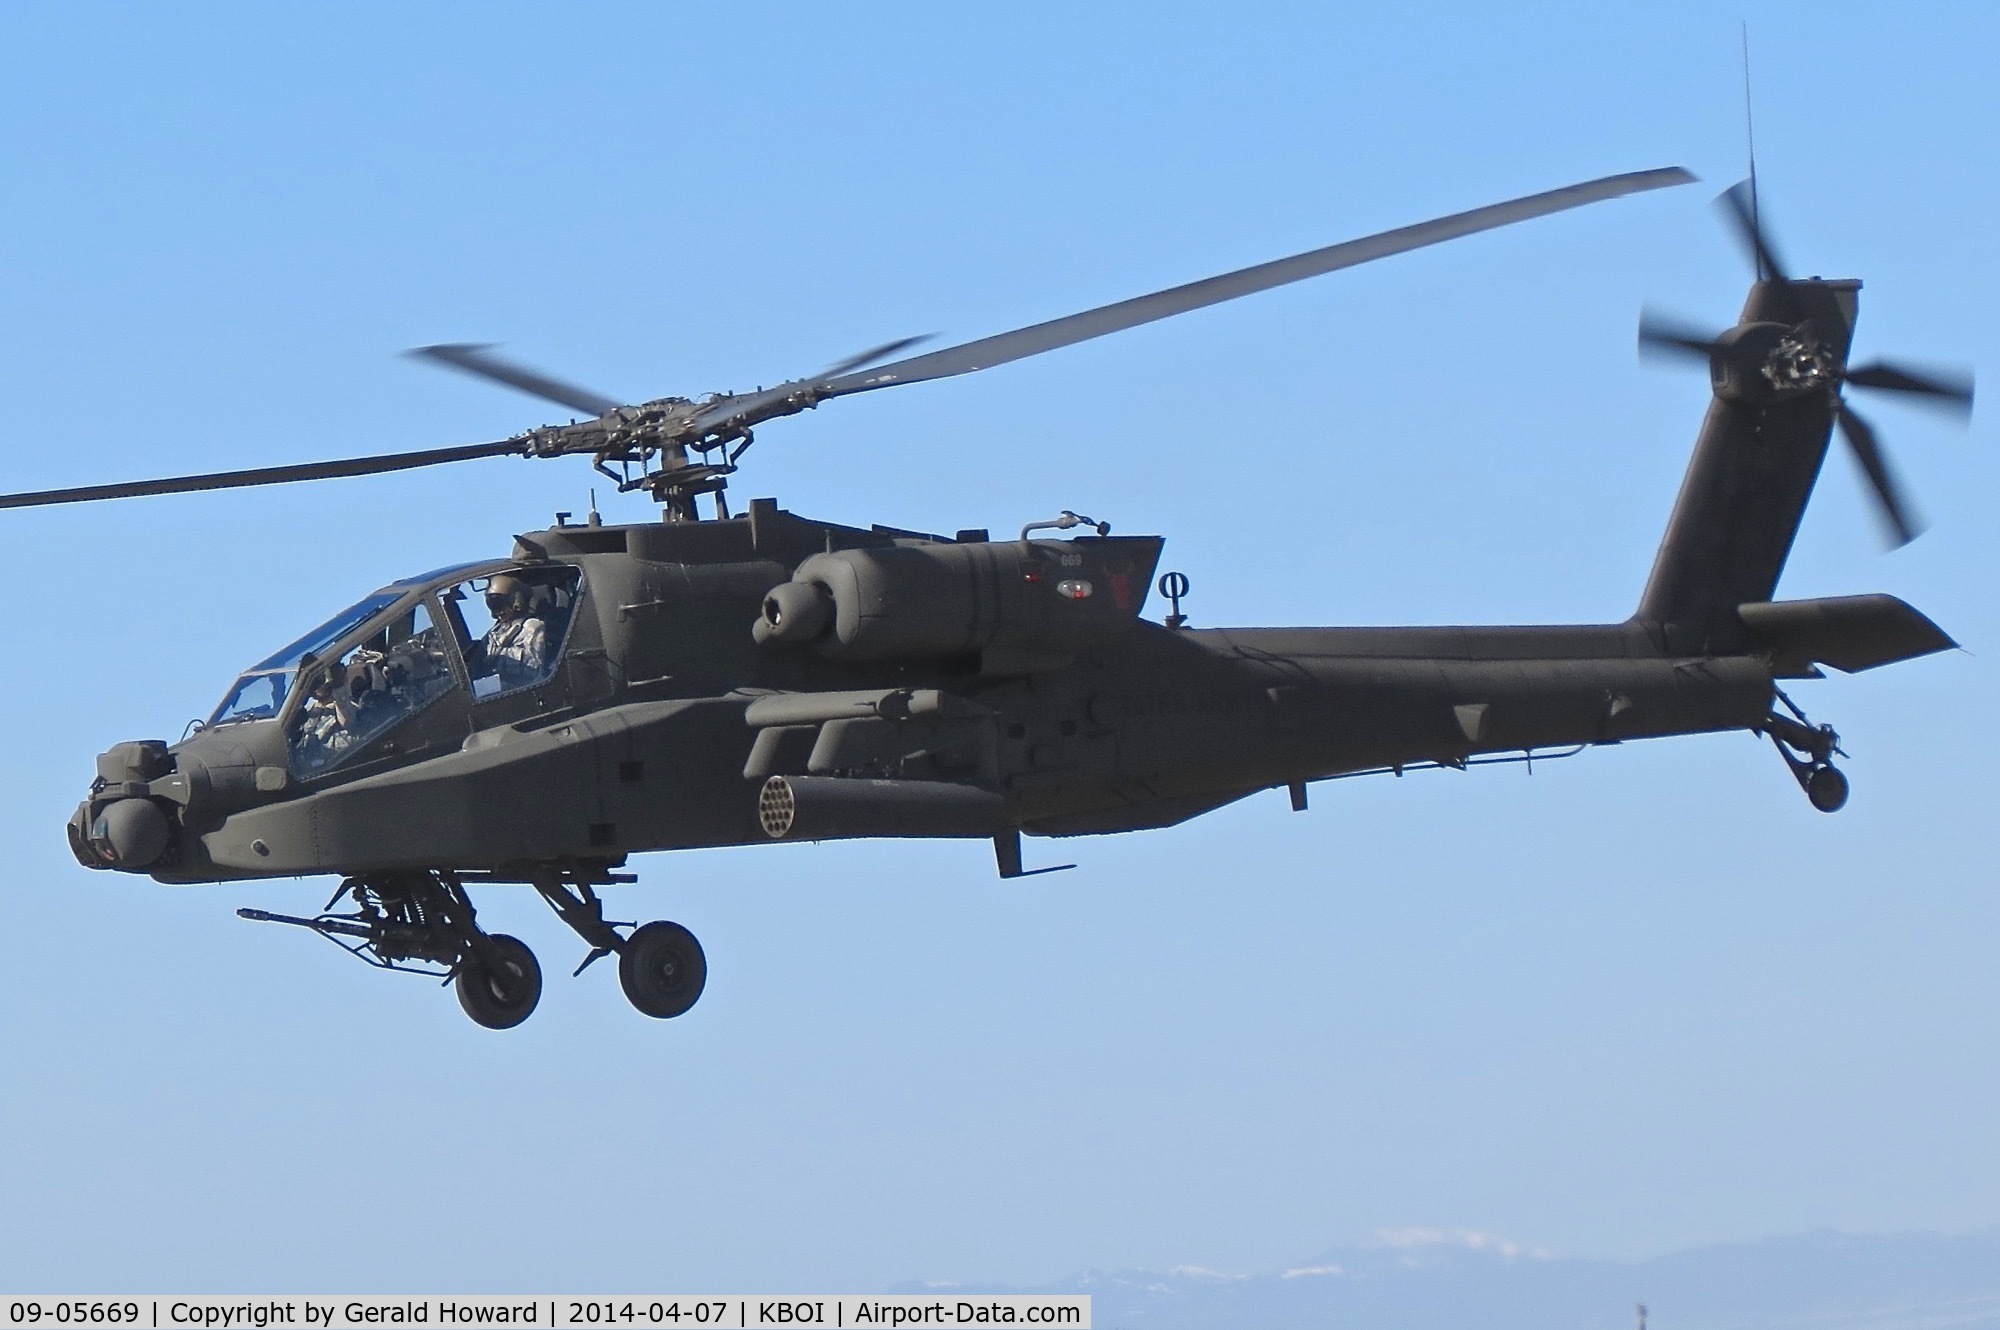 09-05669, 2009 Boeing AH-64D Longbow Apache C/N PVD669, 1-183rd AVN BN, Idaho Army National Guard. This AH-64 was transferred back to the regular Army in 2016.